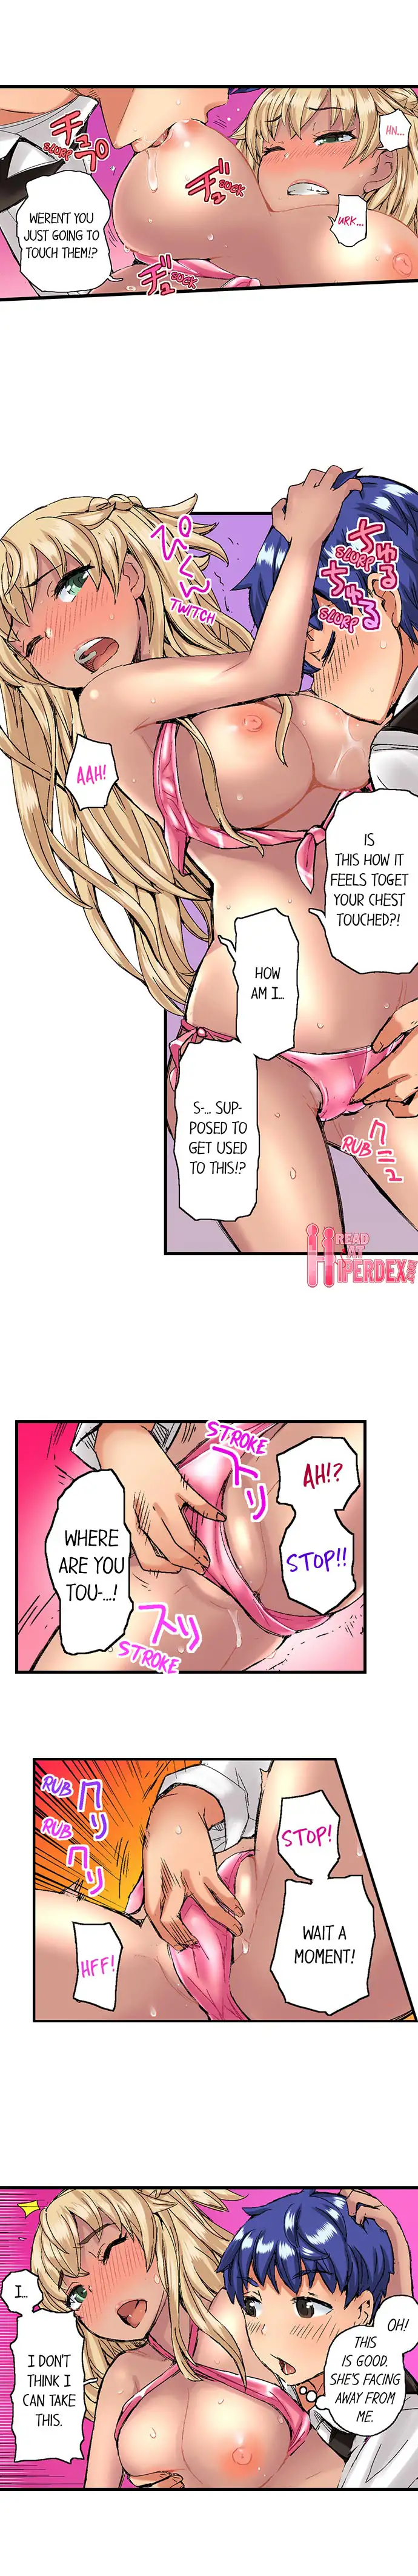 Taking a Hot Tanned Chick’s Virginity - Chapter 4 Page 6